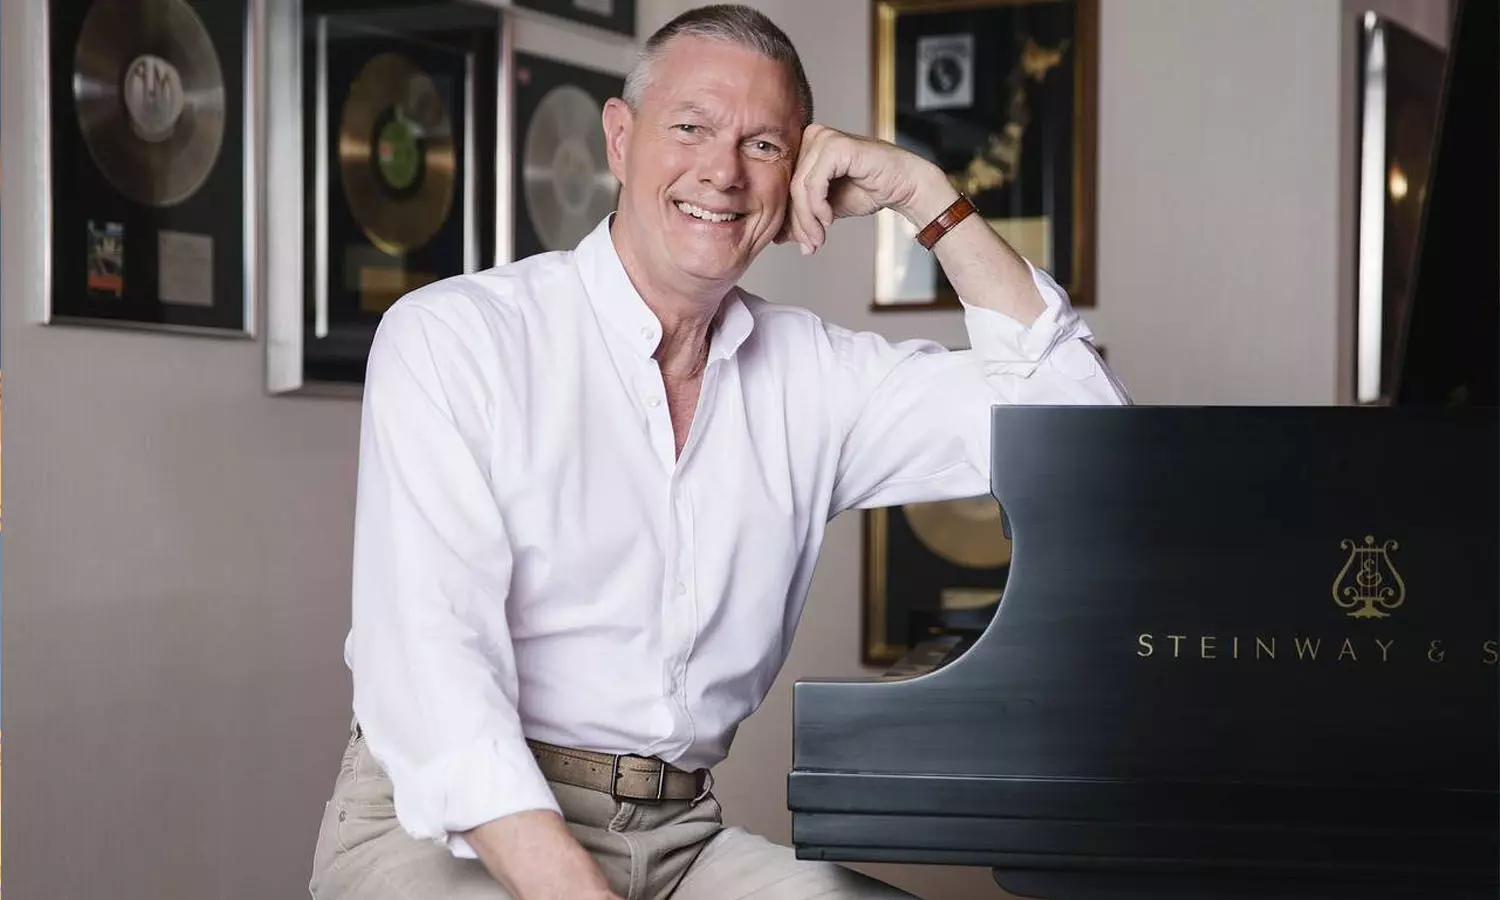 Richard Carpenter sings Keeravanis favourite song after the Oscars